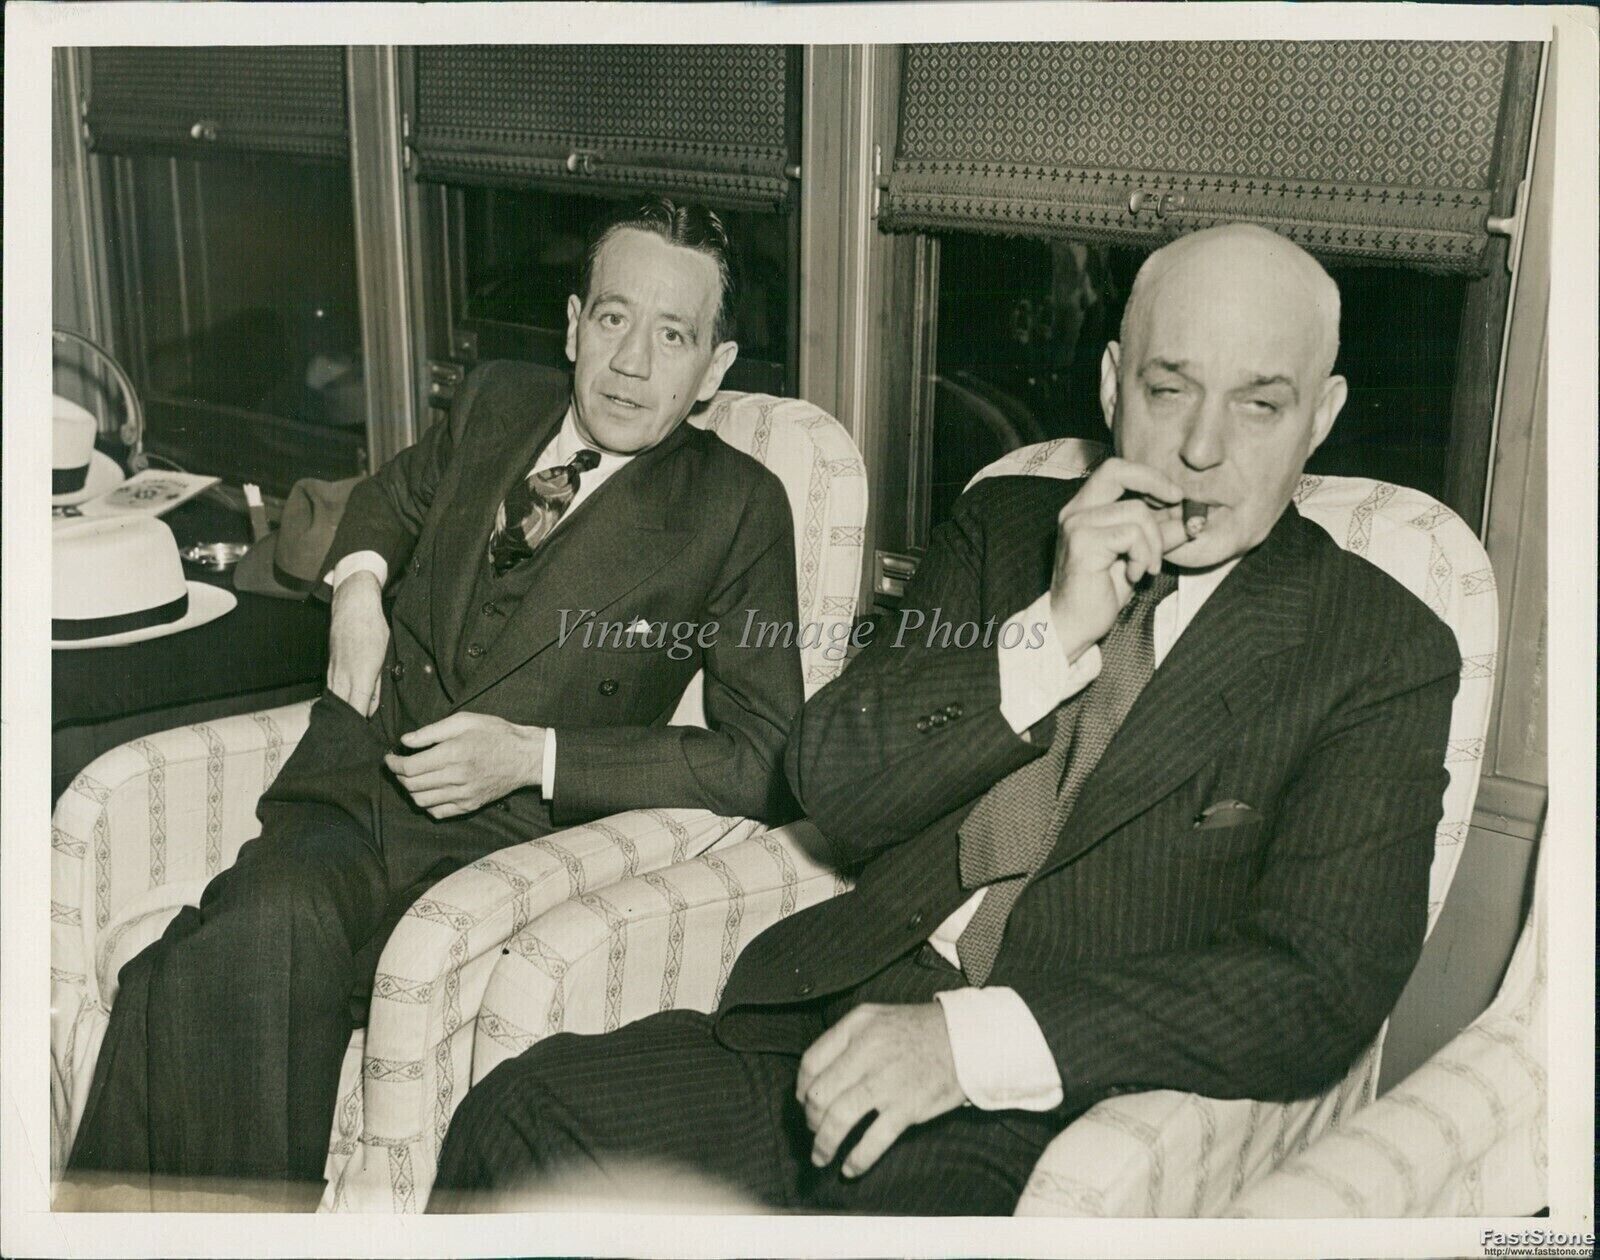 1936 Jim Dooling Smokes In Train Drawing Room With Charles Hussey 7X9 Photo